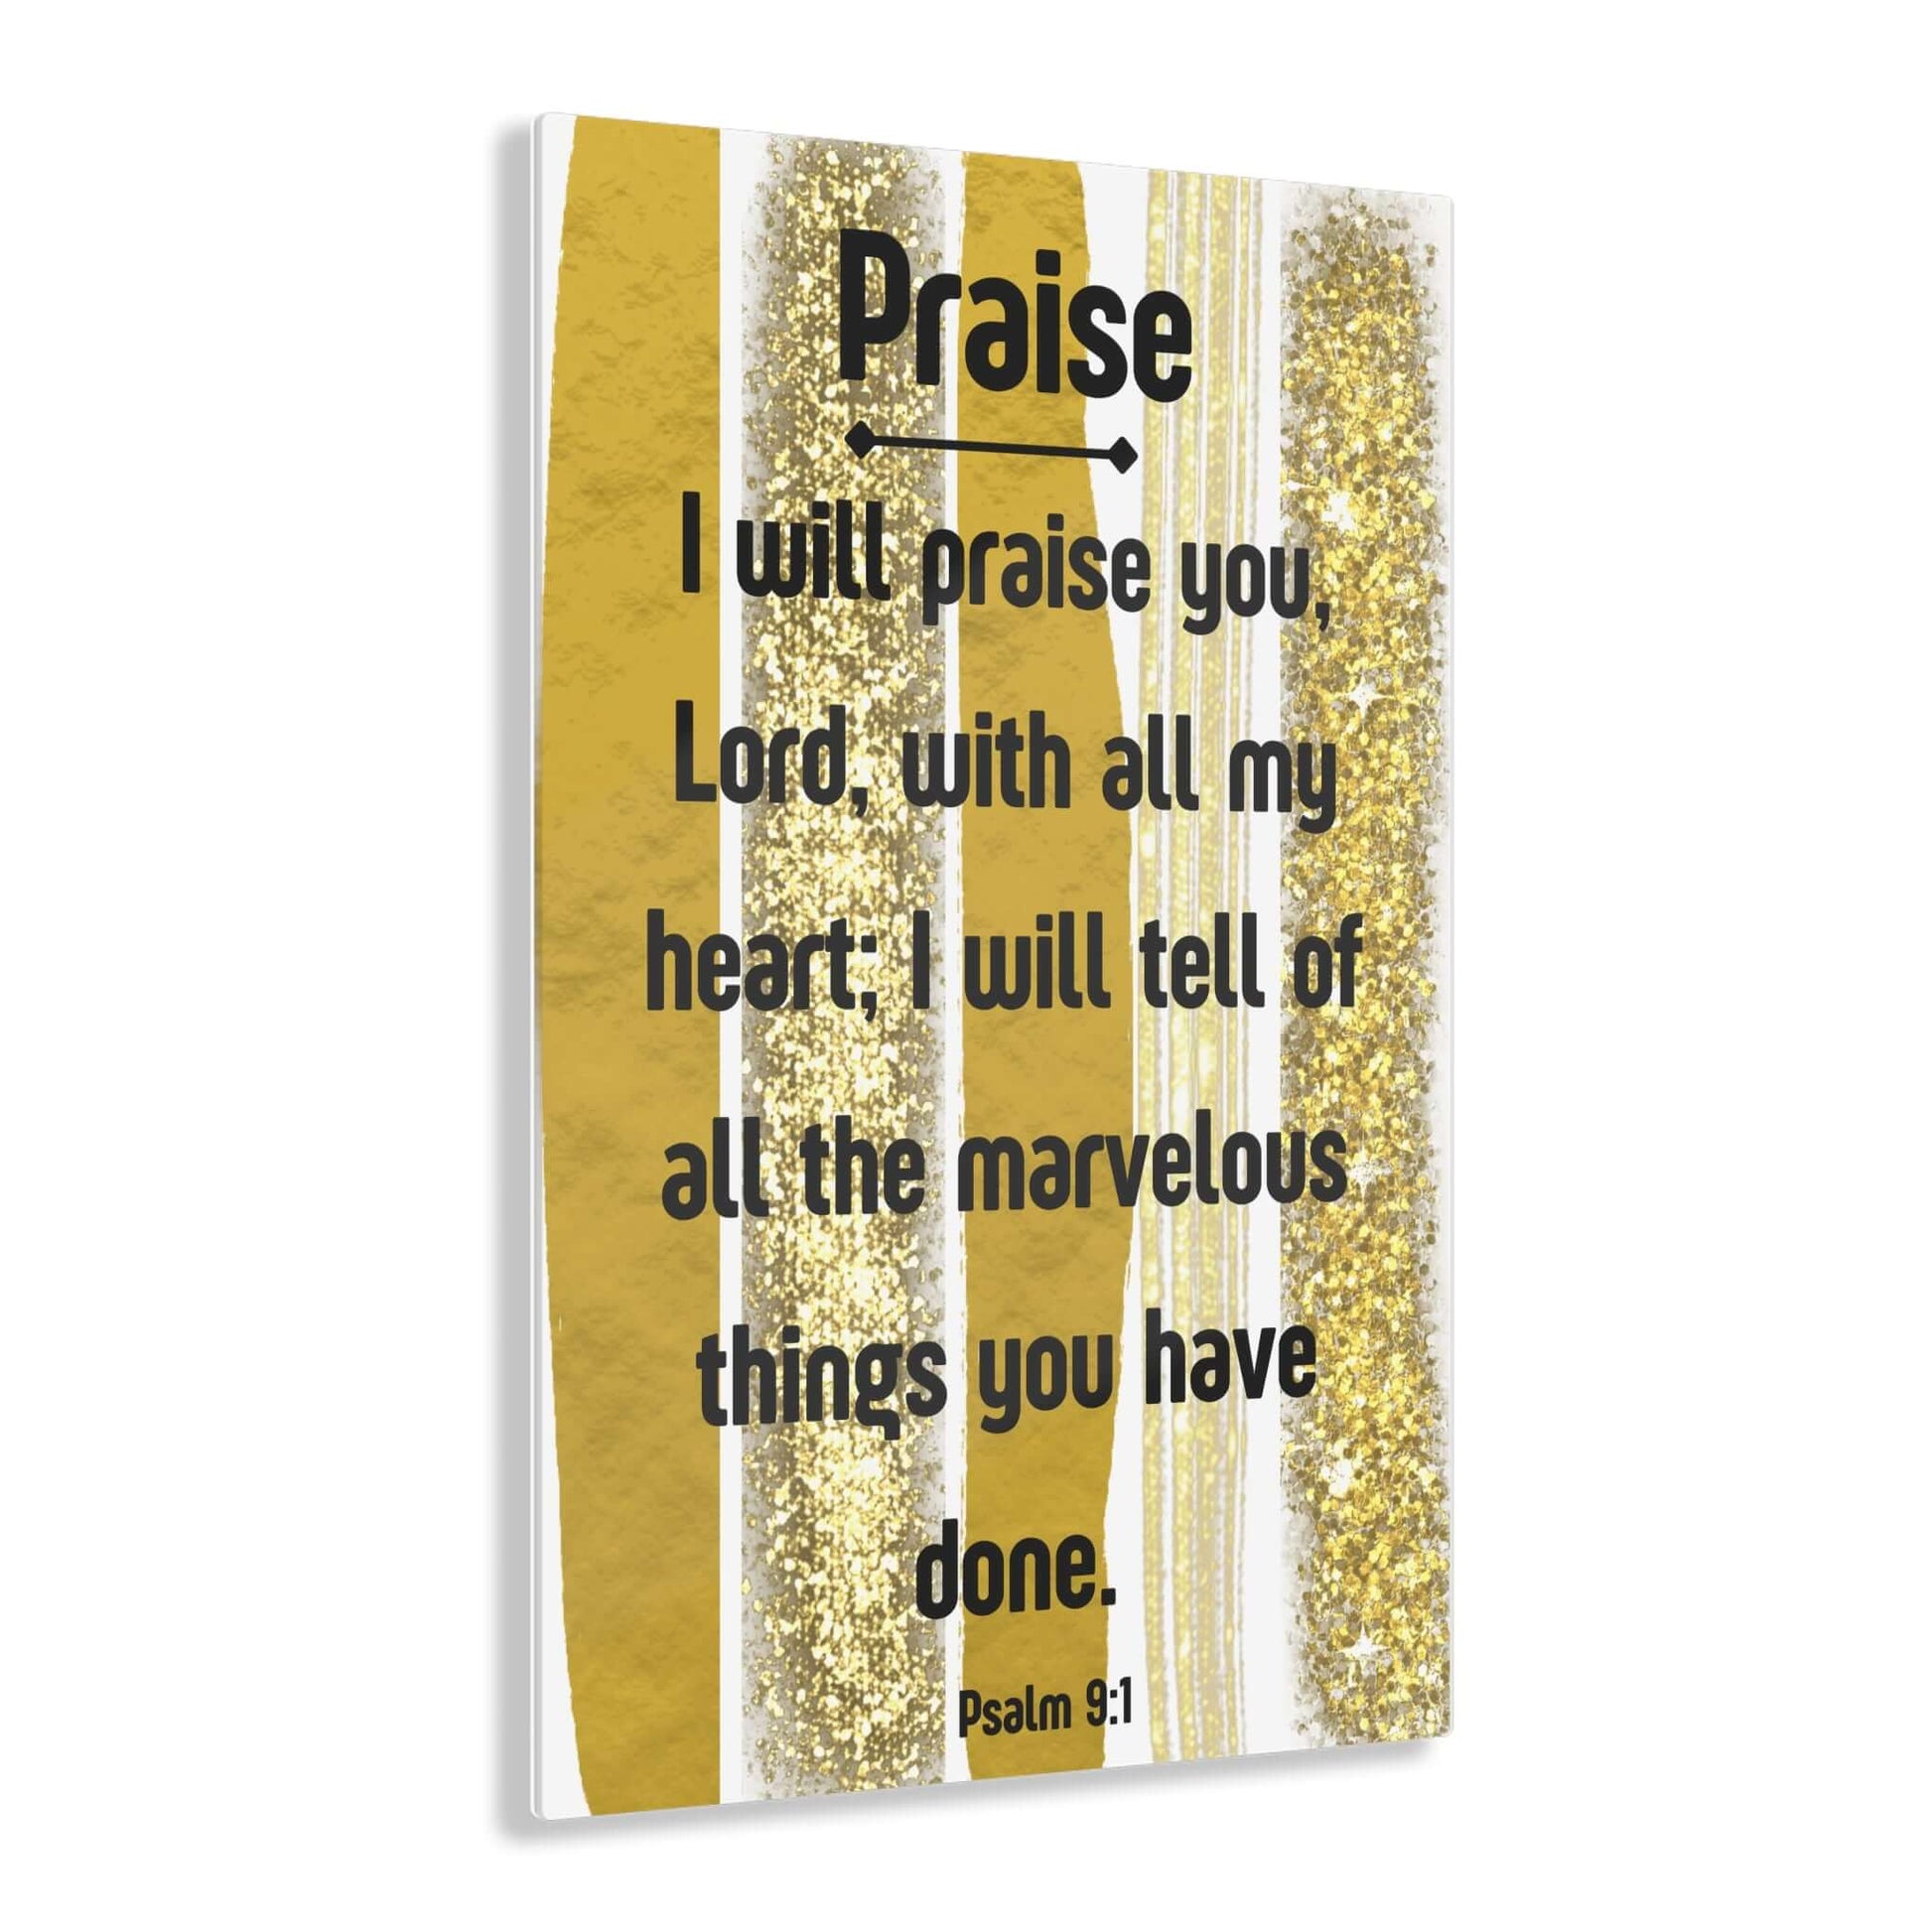 Gold Mirror Wall Decor - Acrylic Print with Inspirational Scripture | Art & Wall Decor,Assembled in the USA,Assembled in USA,Decor,Home & Living,Home Decor,Indoor,Made in the USA,Made in USA,Poster